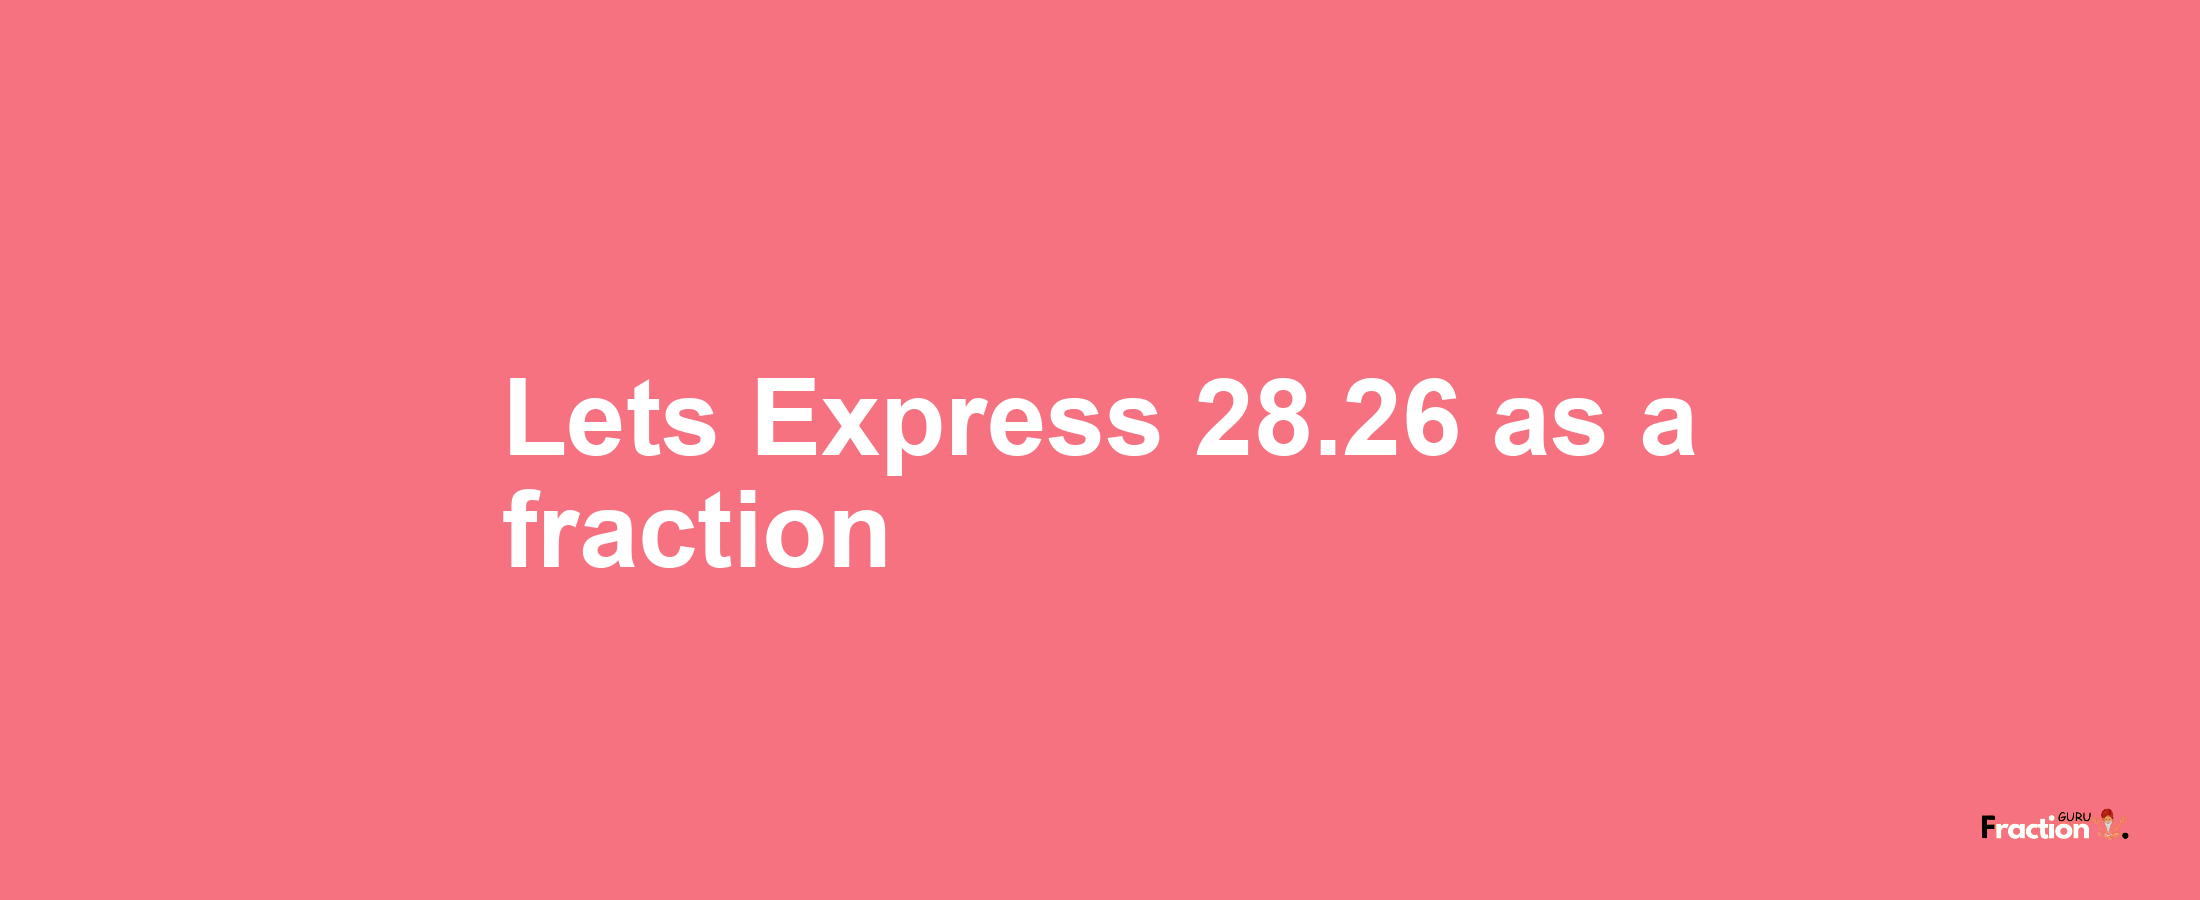 Lets Express 28.26 as afraction